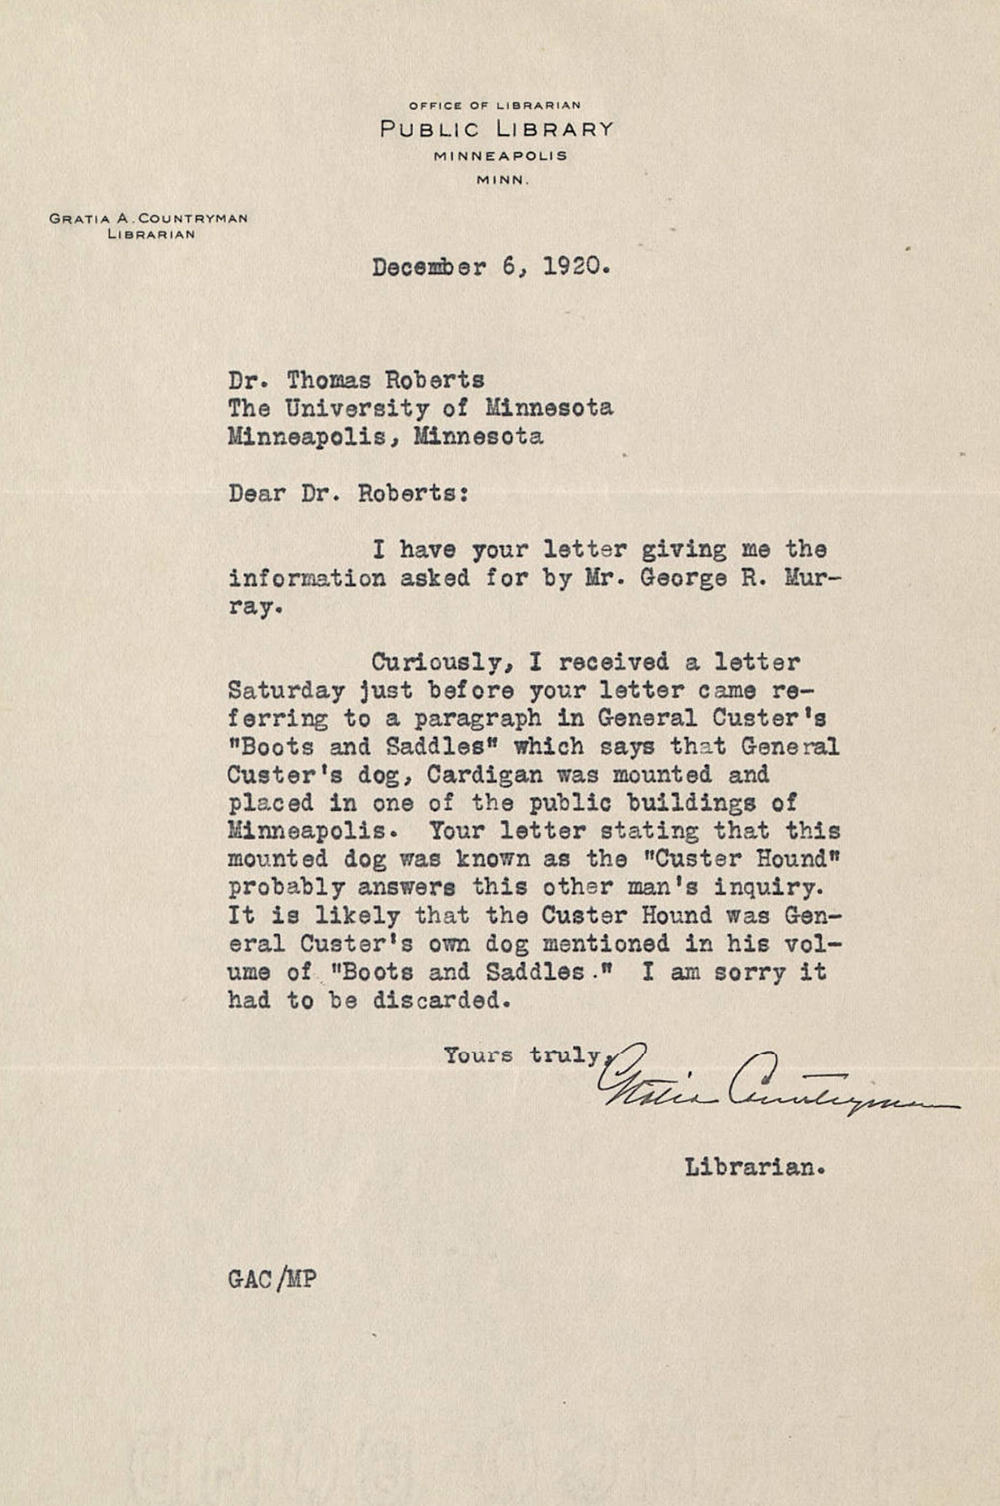 Countryman's December 6, 1920 letter to Roberts